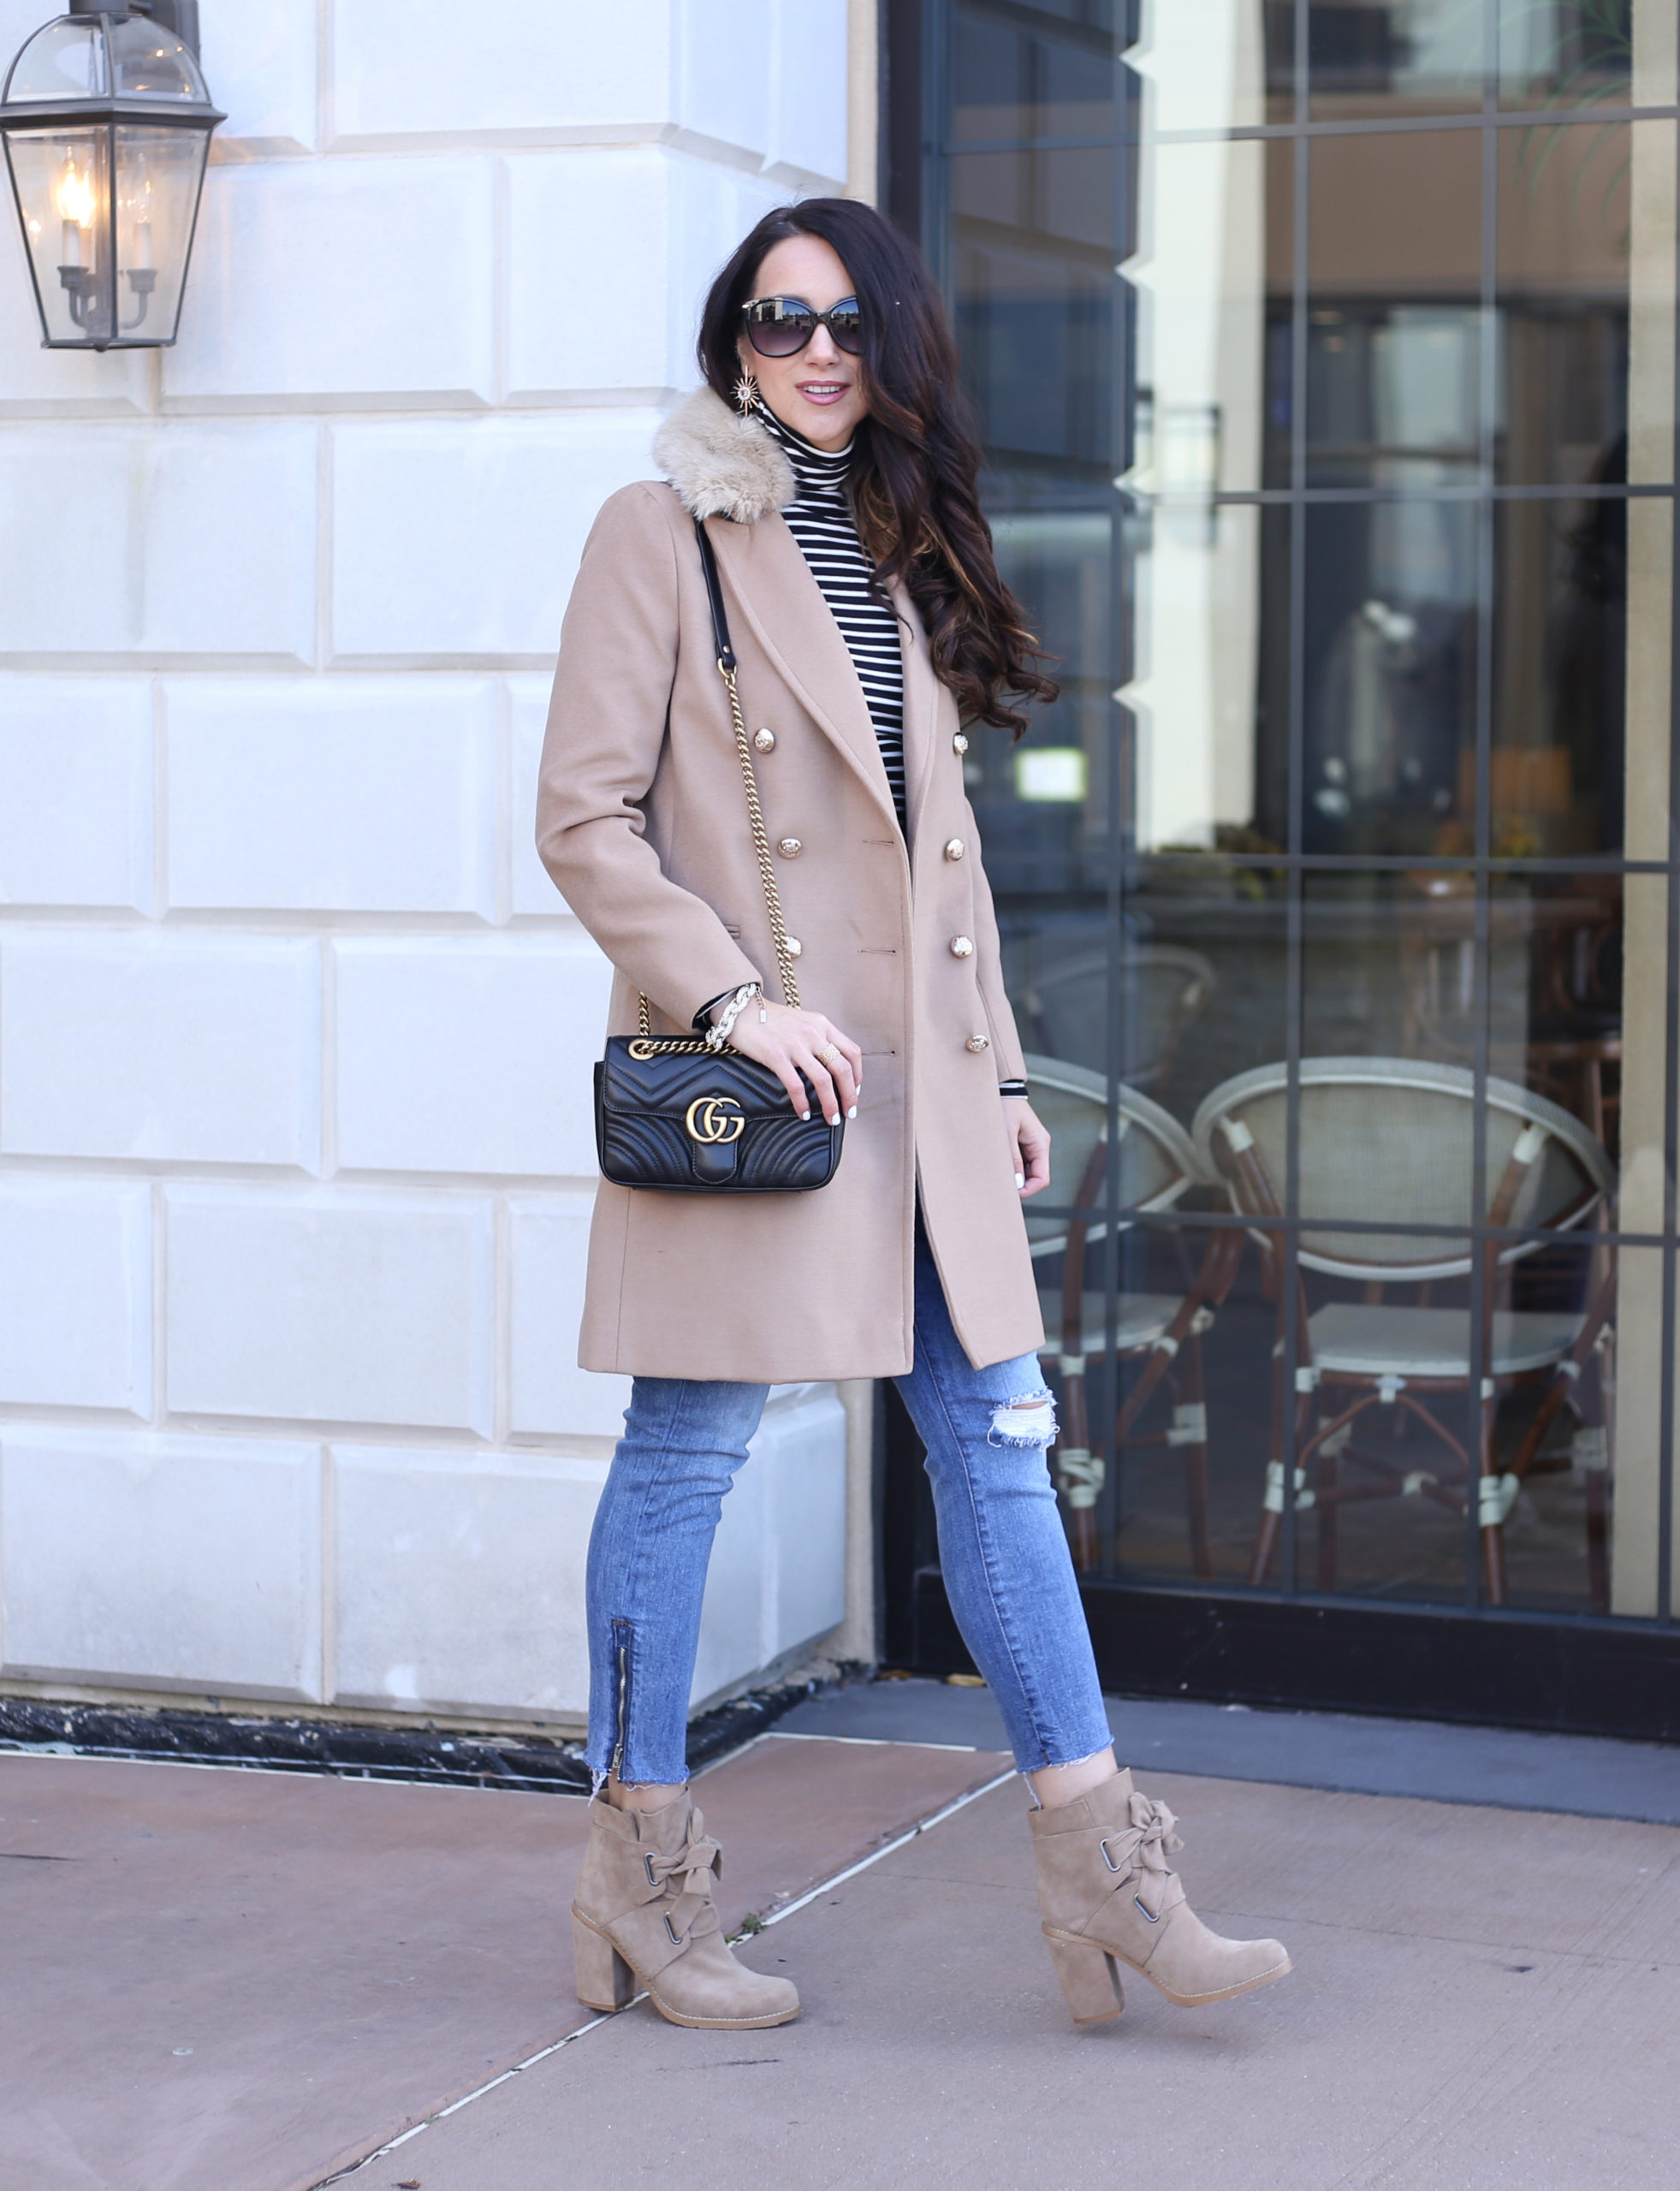 anna monteiro of blushing rose style blog wearing camel coat, faux fur collar coat and booties with block heels